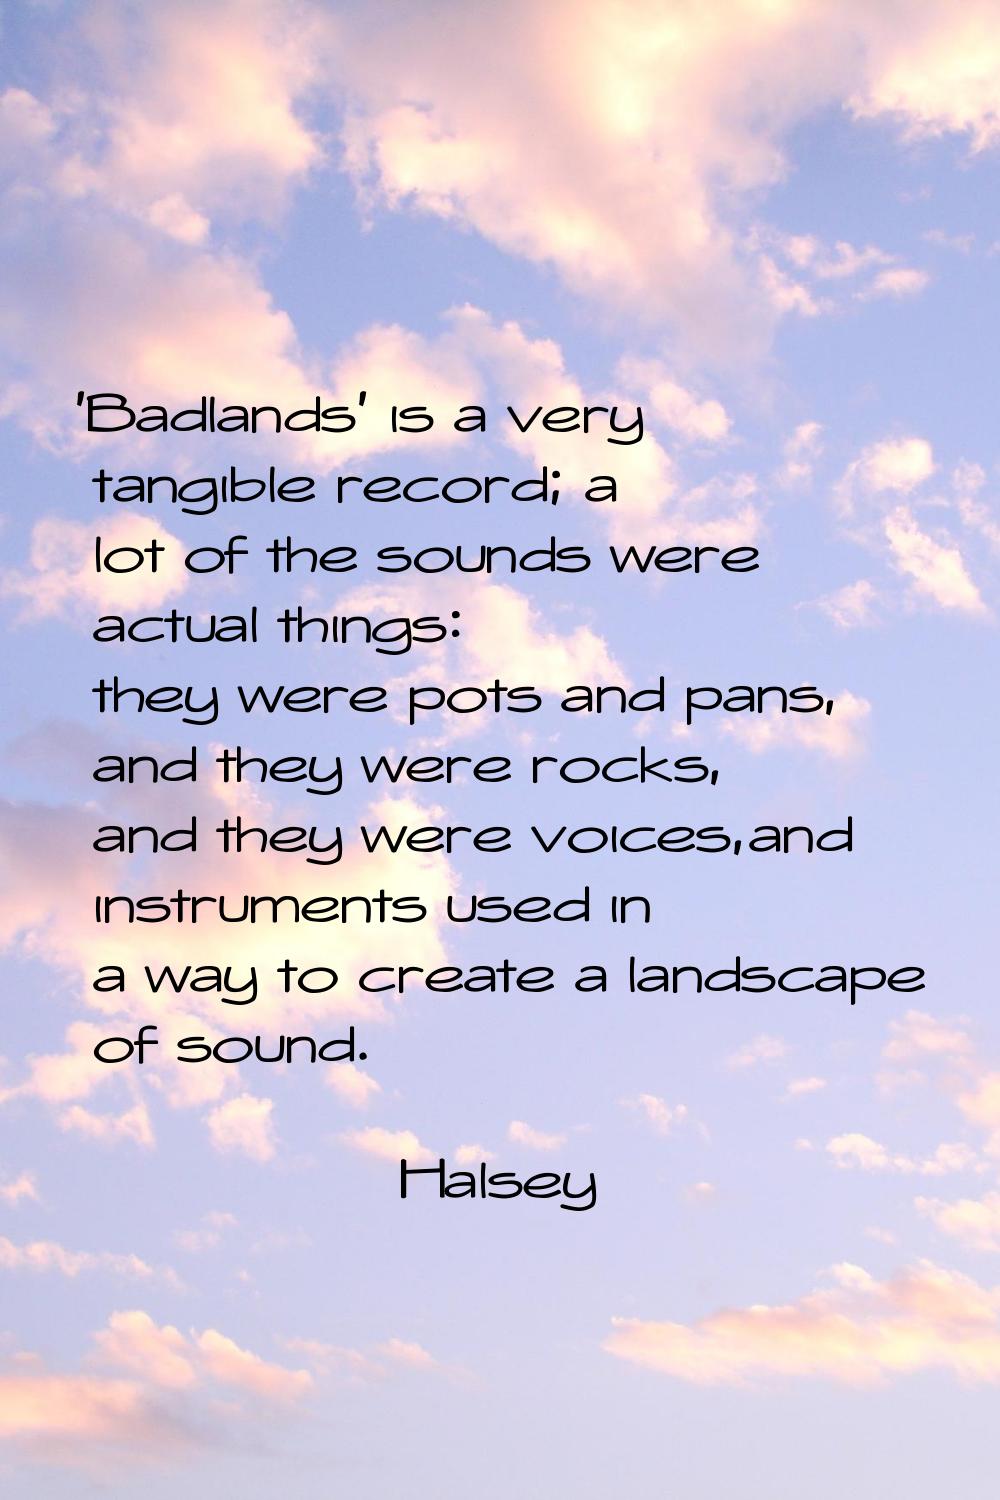 'Badlands' is a very tangible record; a lot of the sounds were actual things: they were pots and pa